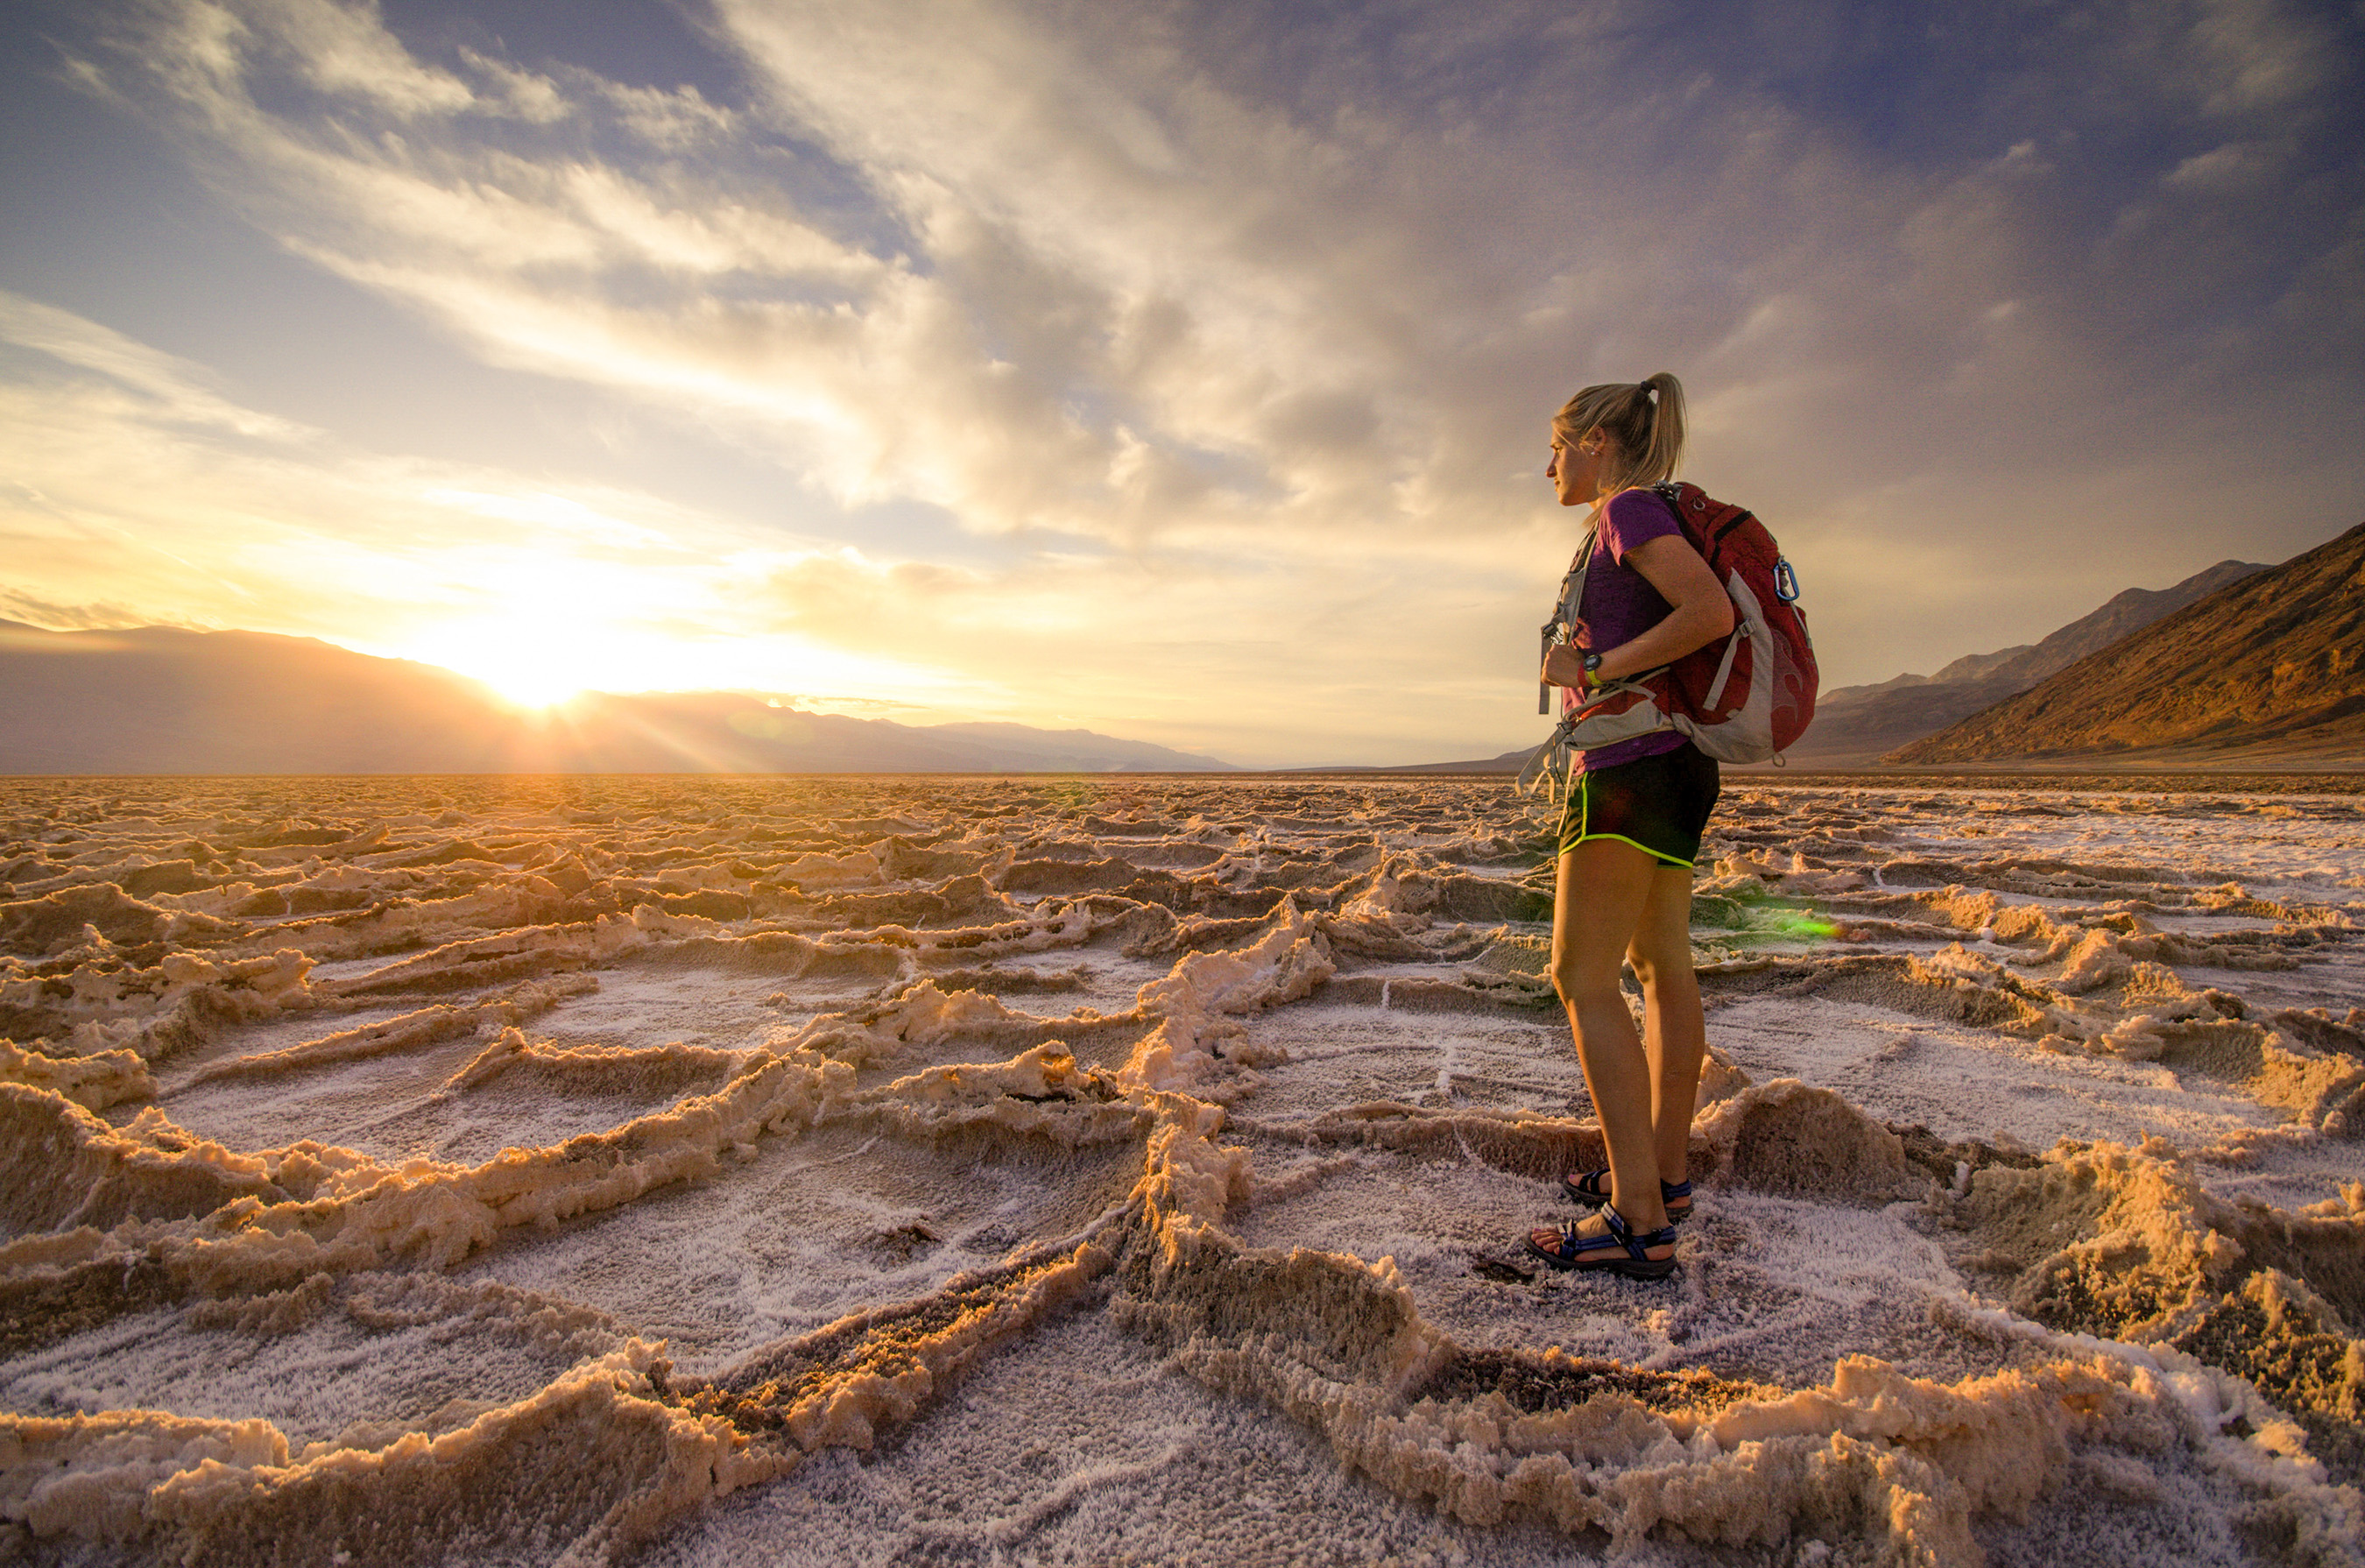 Death Valley National Park, Sarah Gustafson, Share the Experience 2015 photo contest